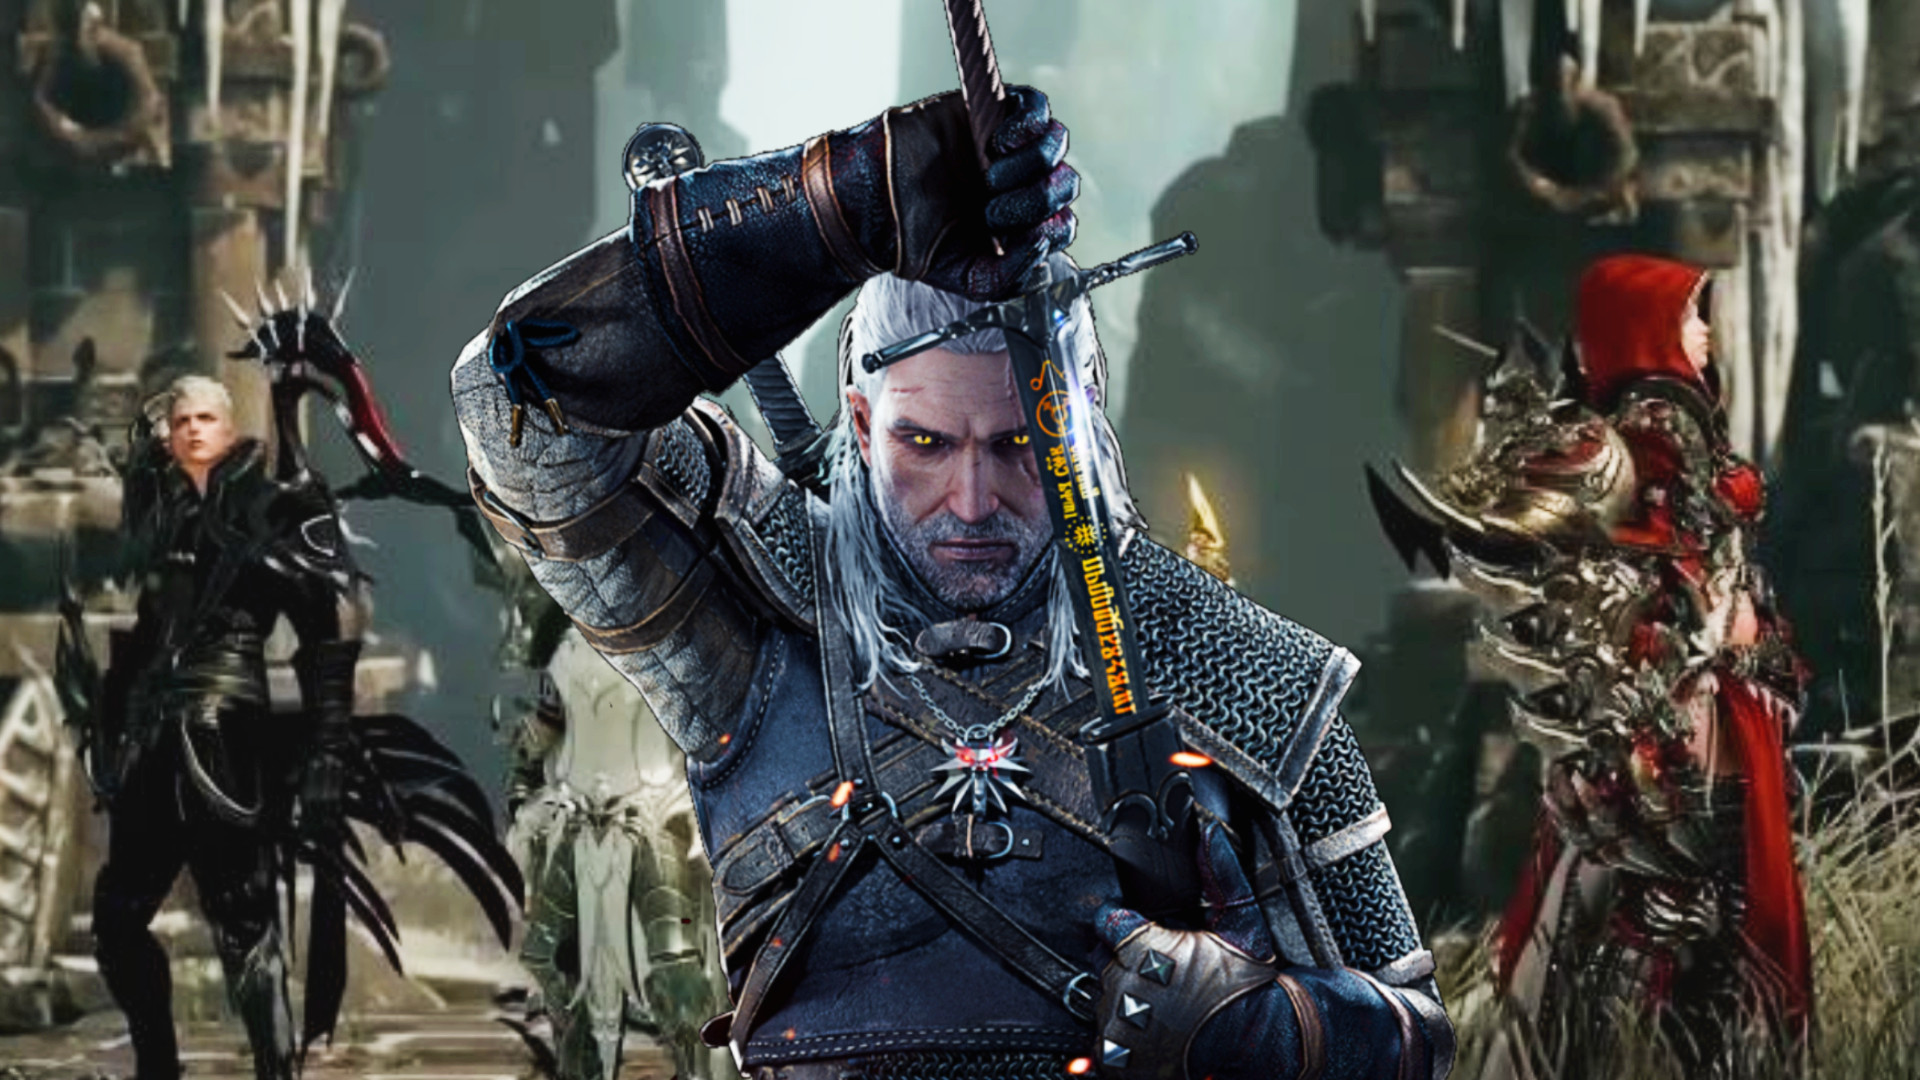 Lost Ark Witcher 3 collaboration coming to ARPG in January